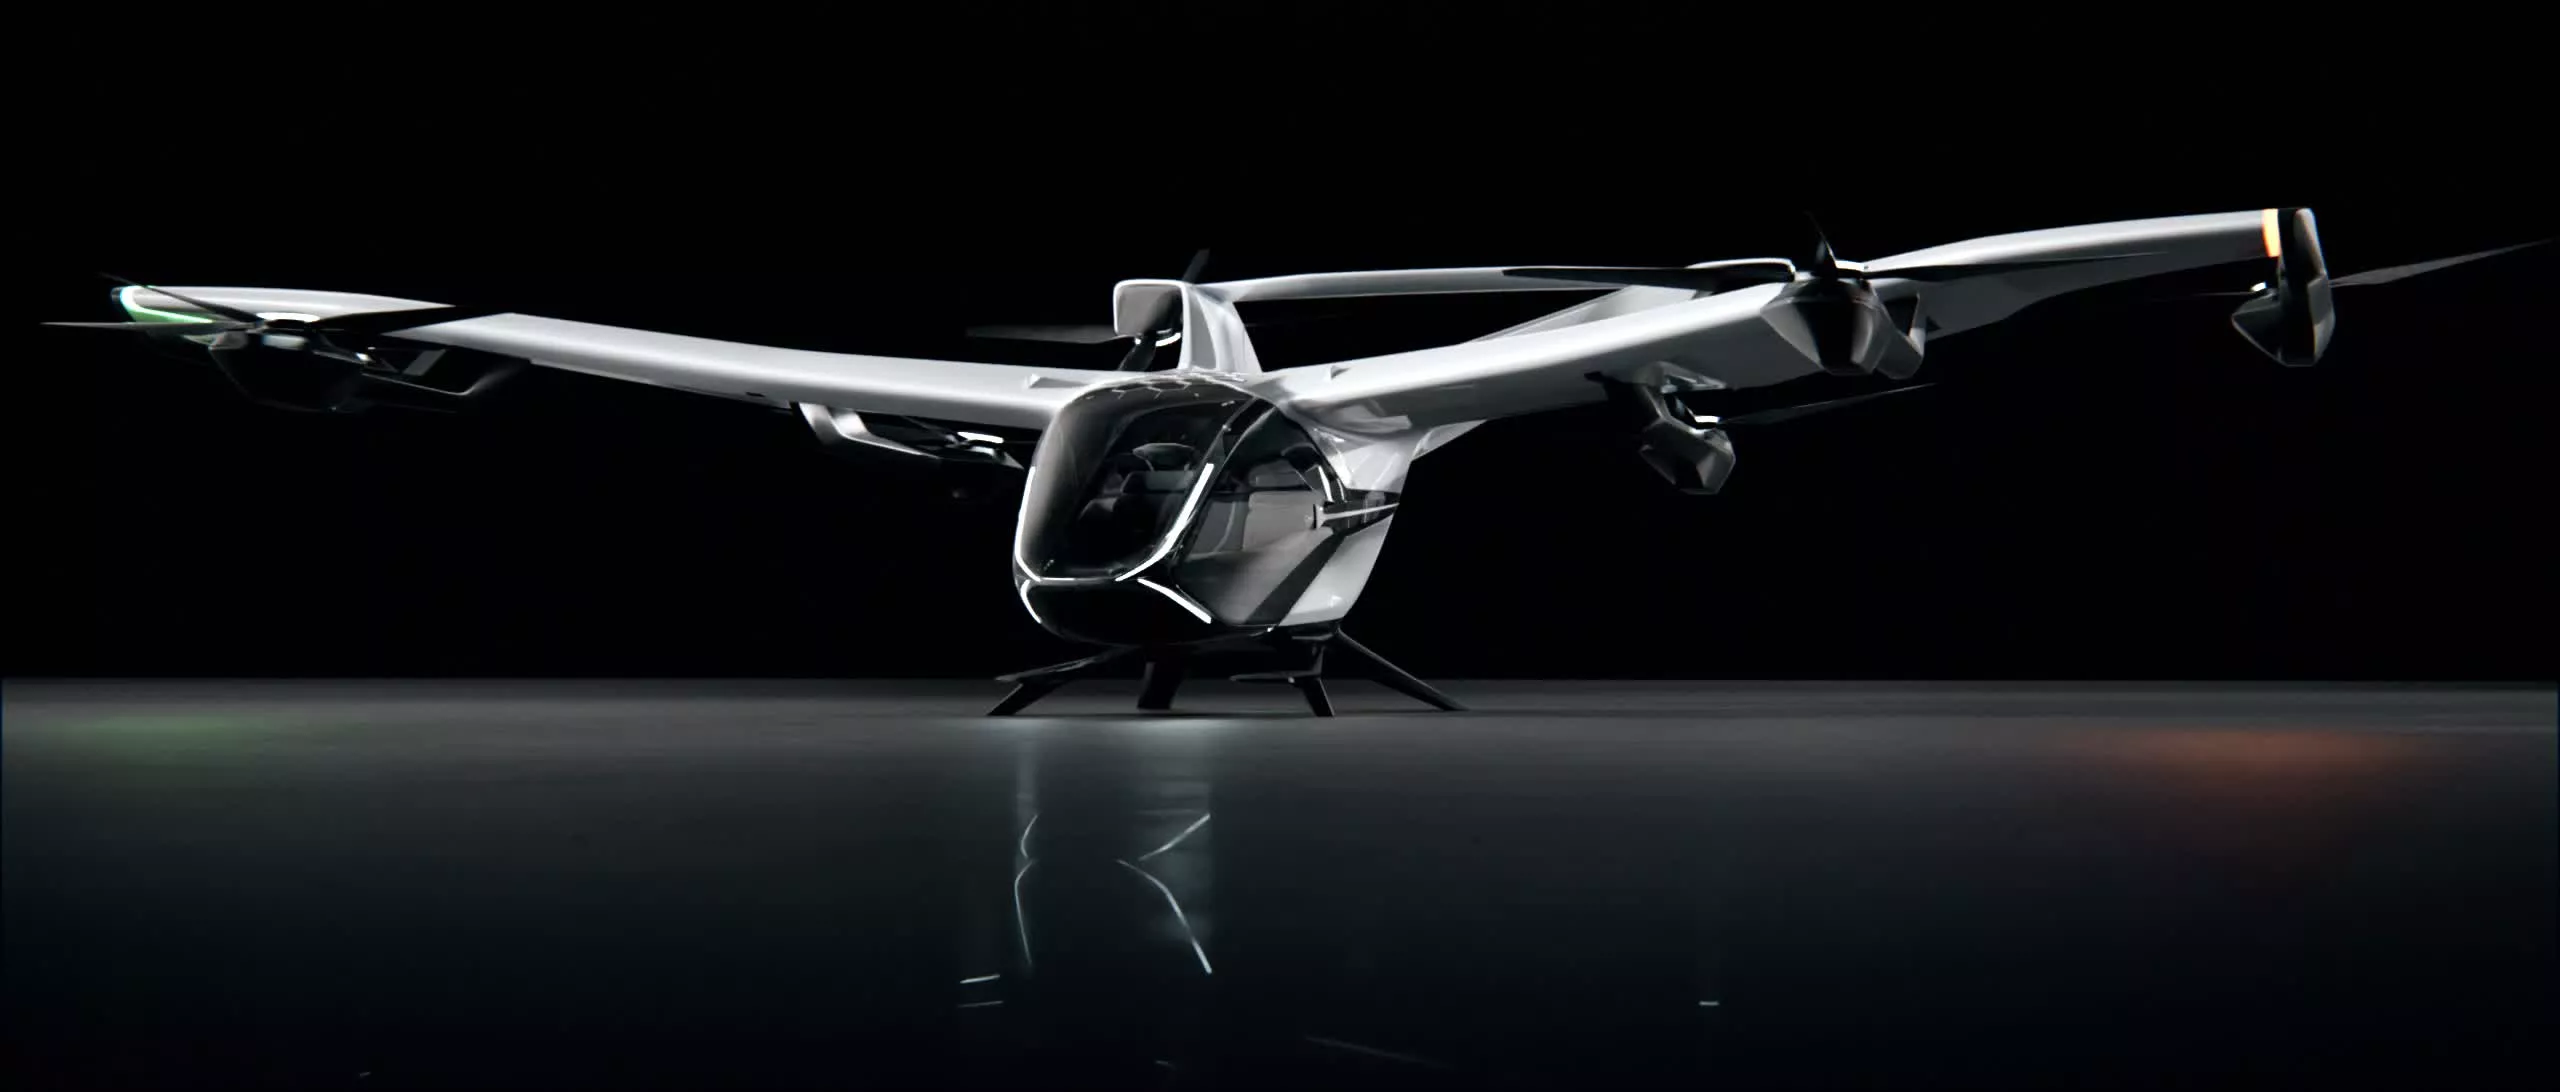 Airbus unveils the next generation of its flying taxi